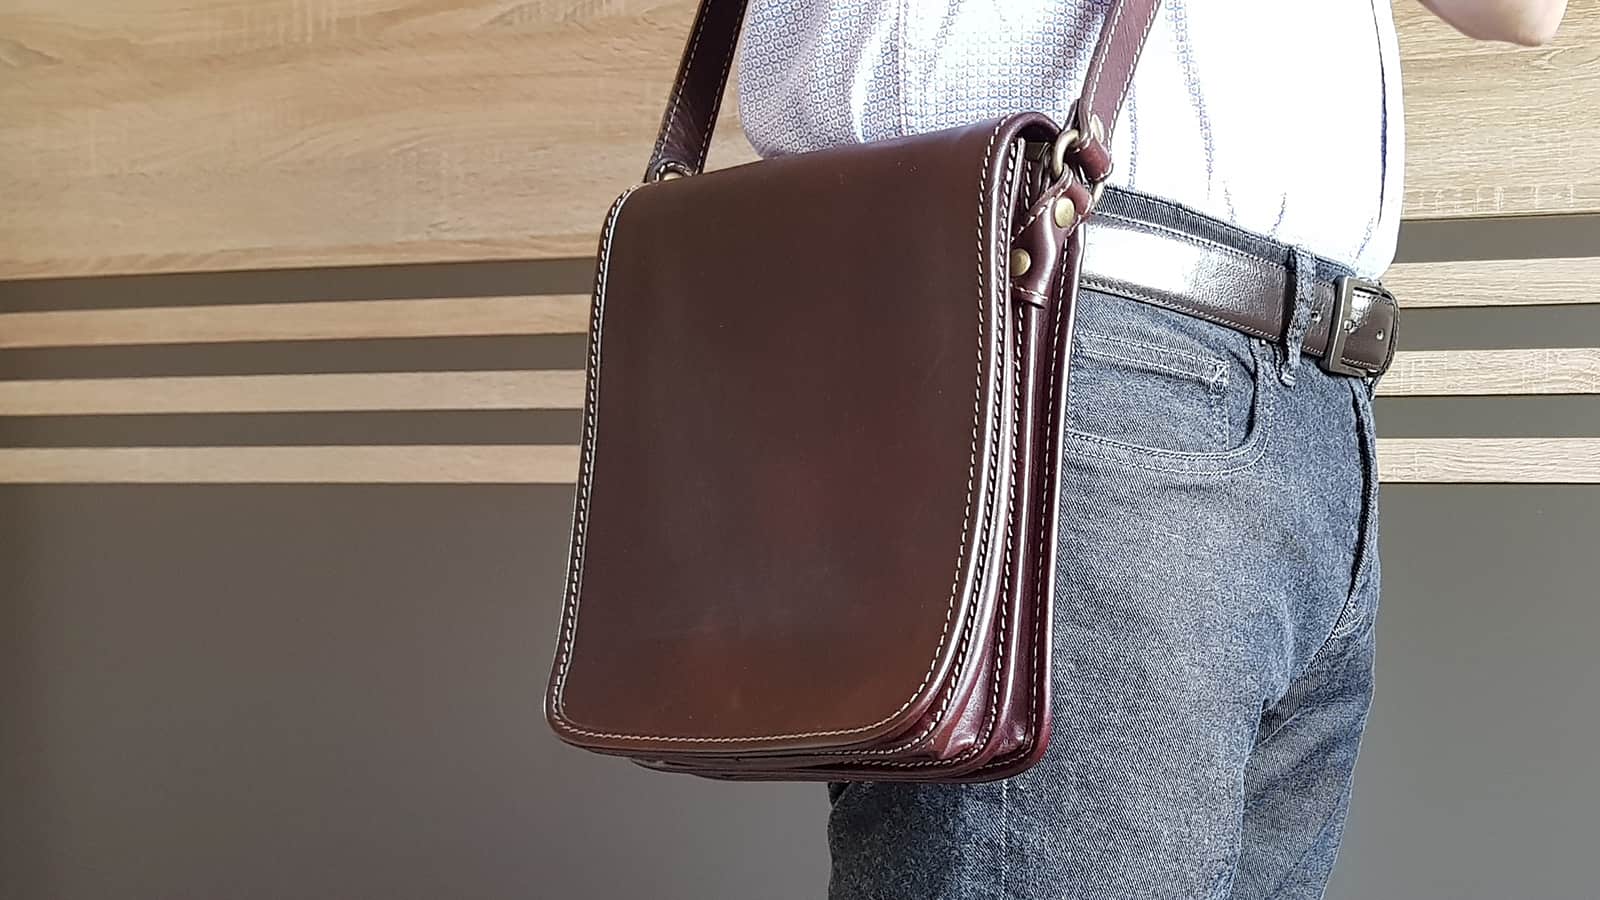 Time Resistance Messenger Bag 'On The Road' worn by a man